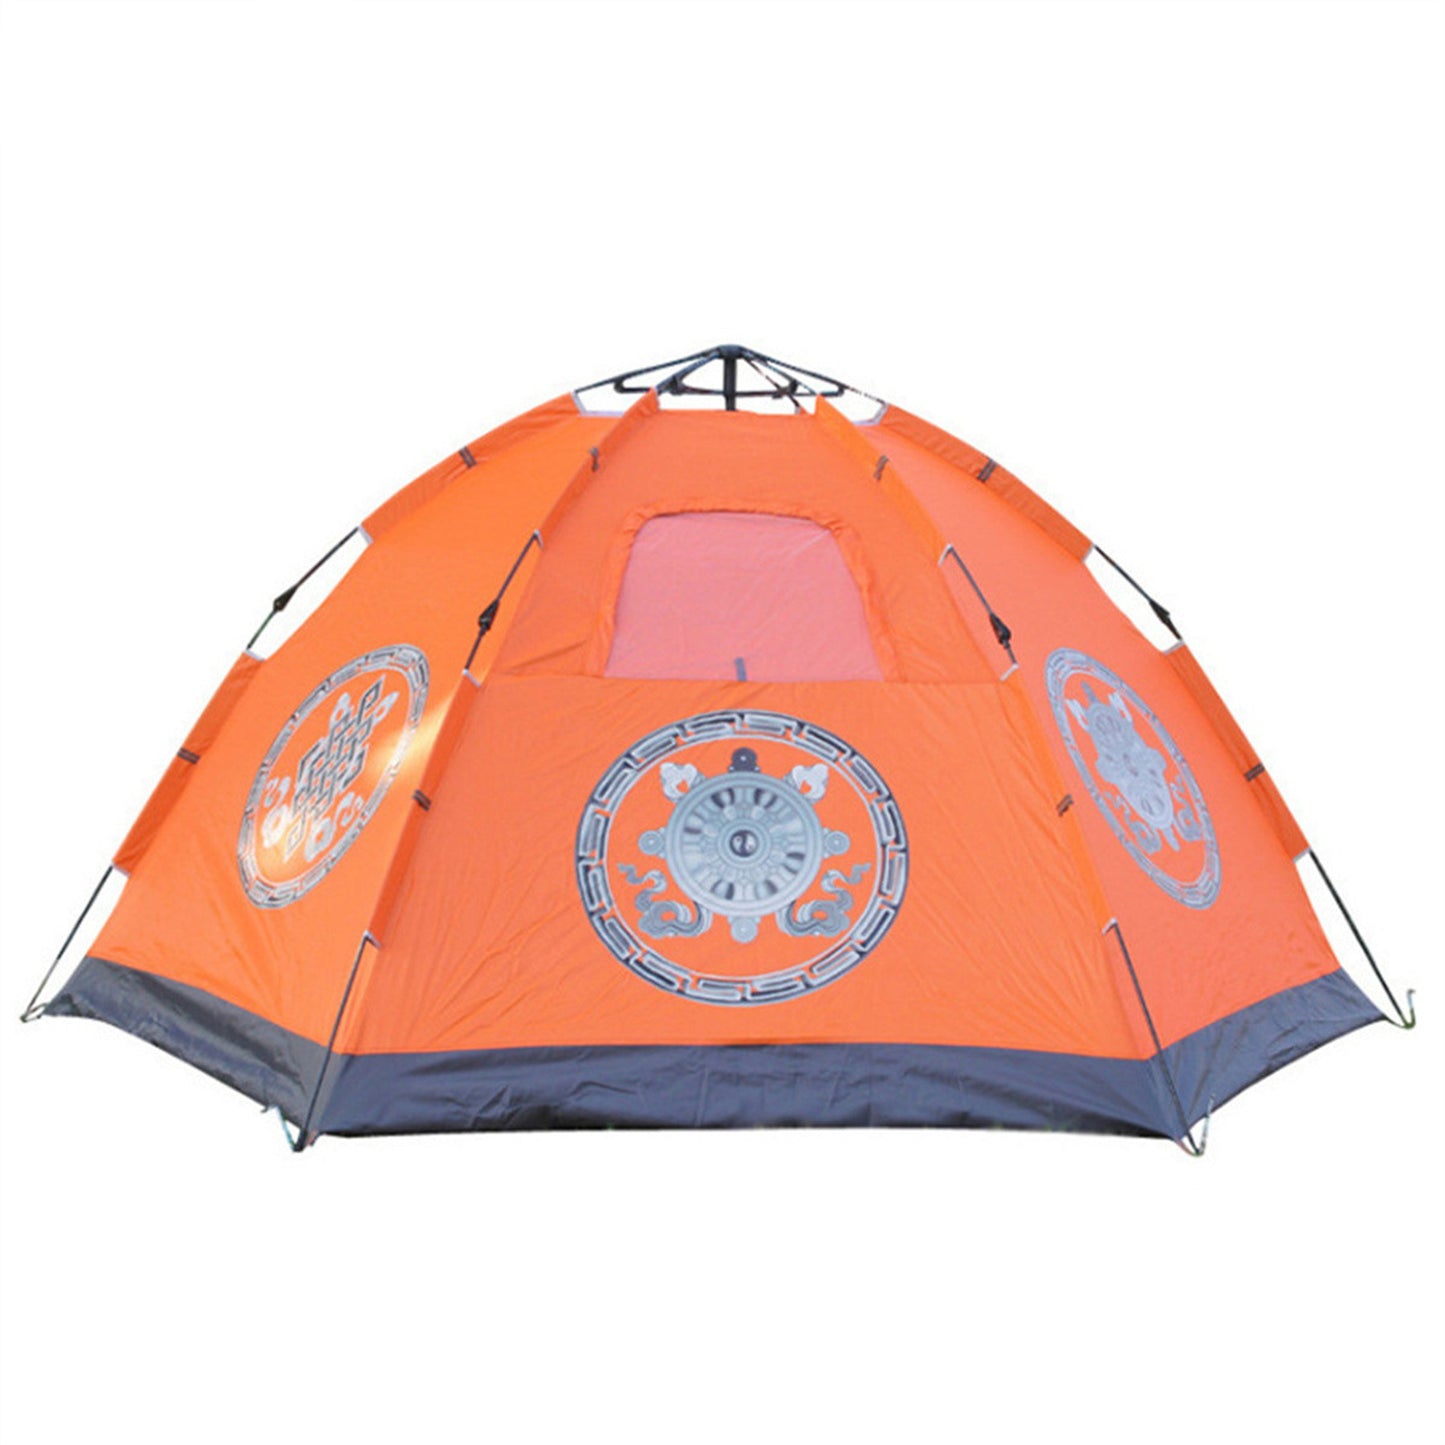 Single layer 4-6 person automatic tent